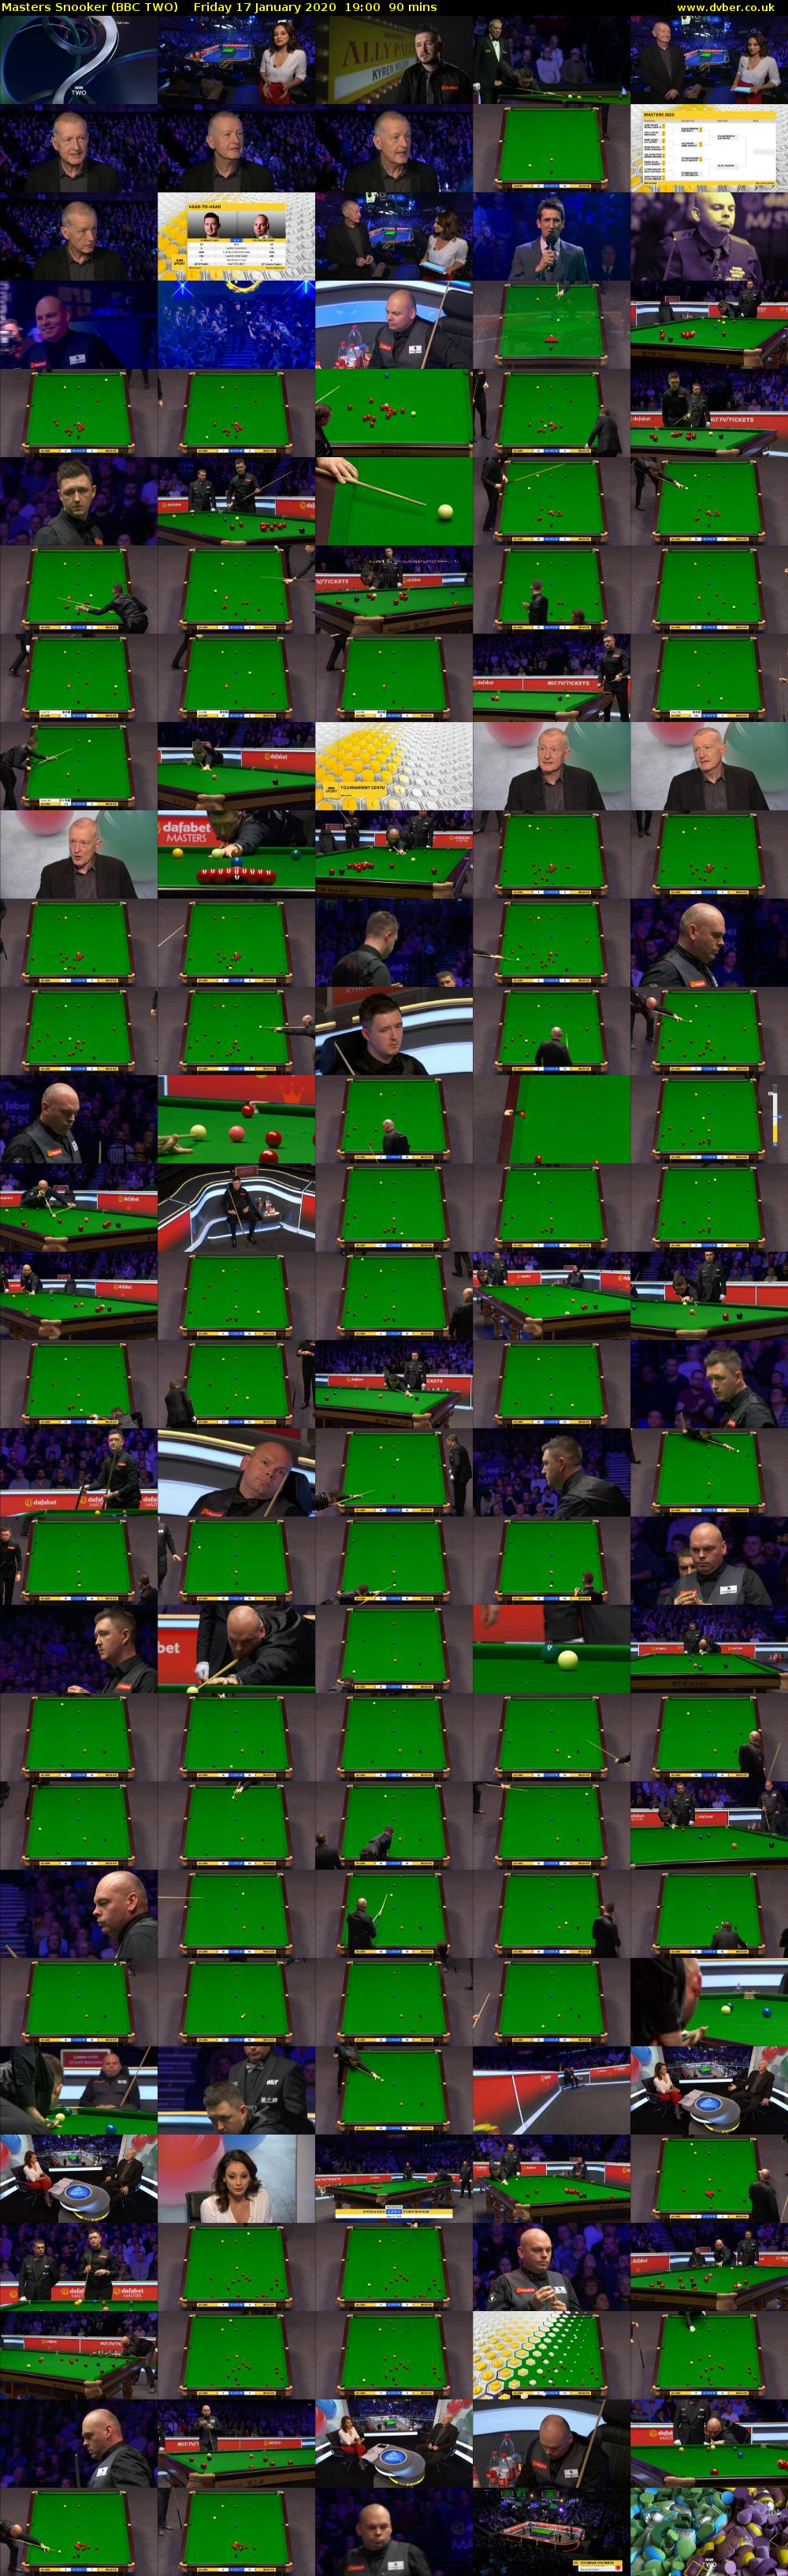 Masters Snooker (BBC TWO) Friday 17 January 2020 19:00 - 20:30